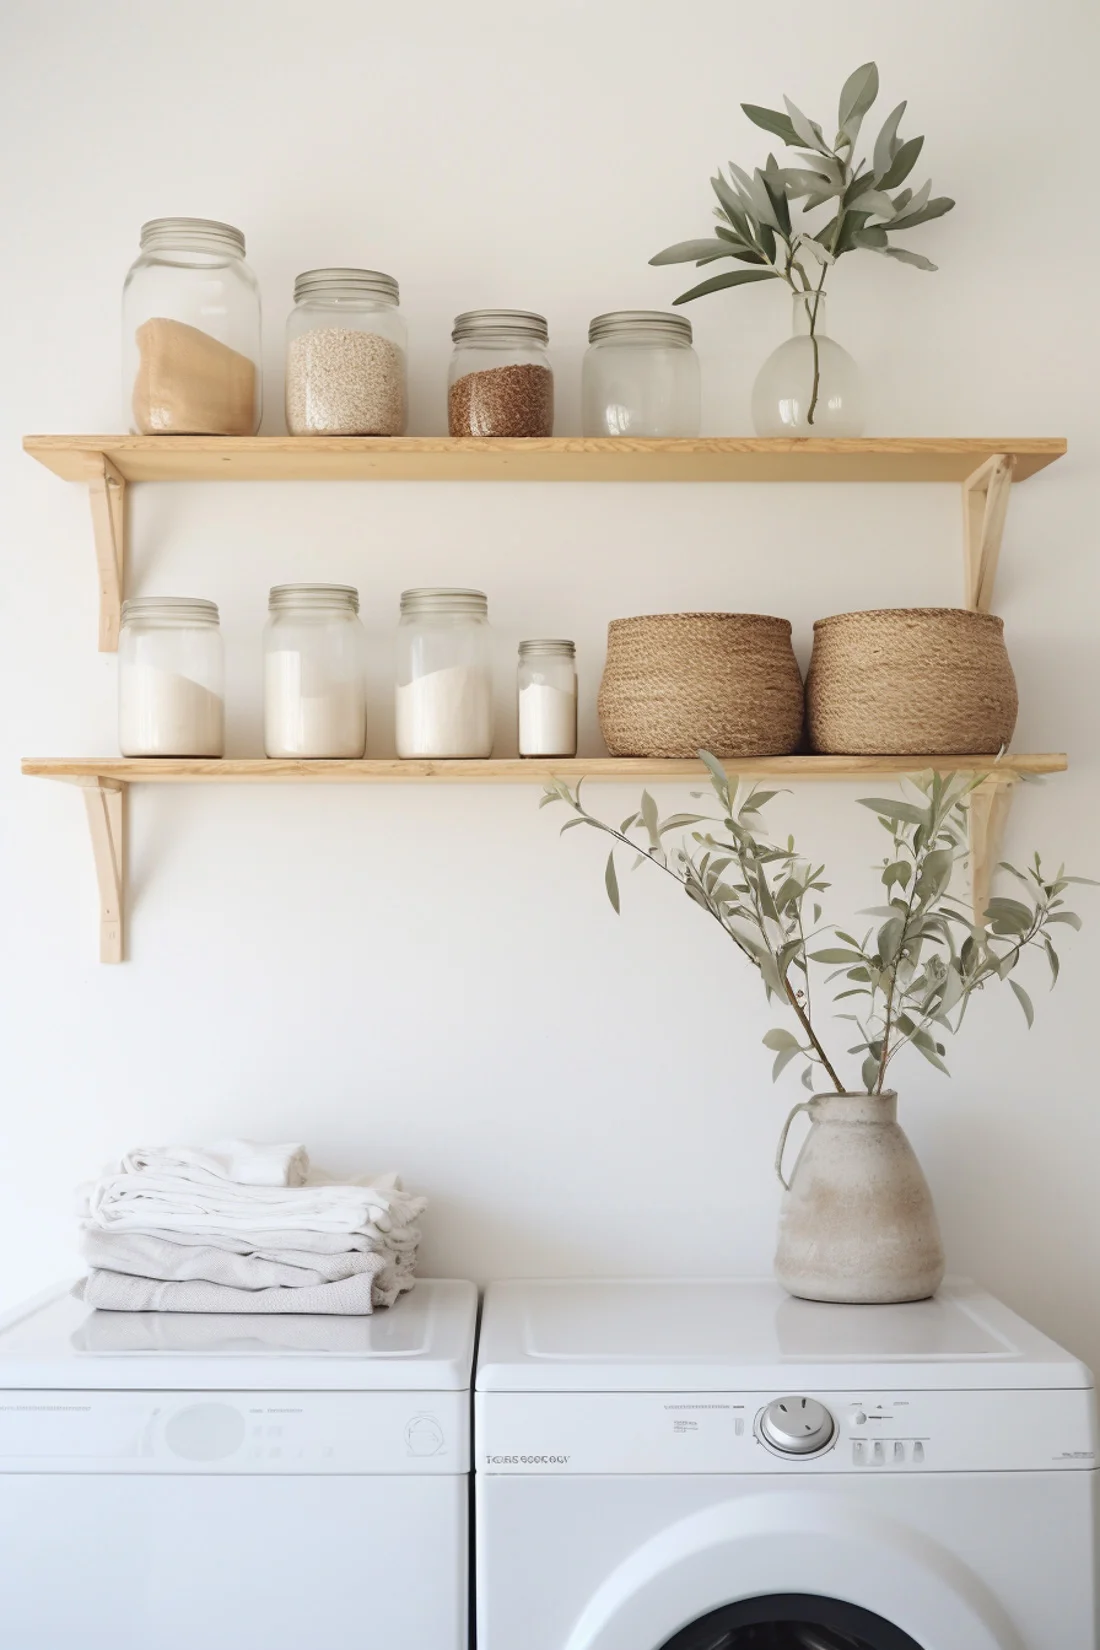 wood laundry shelf with wood supports, with baskets and glass jar organizers